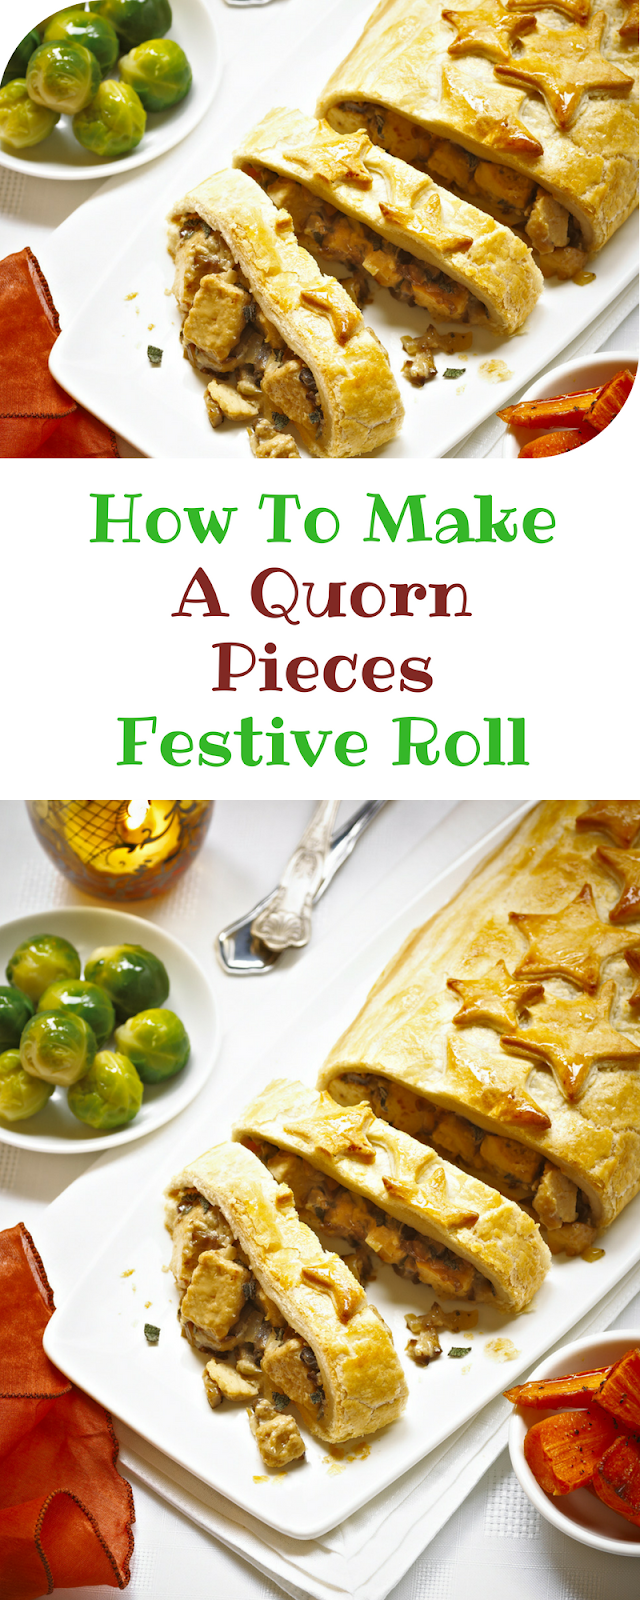 Quorn Pieces Festive Roll